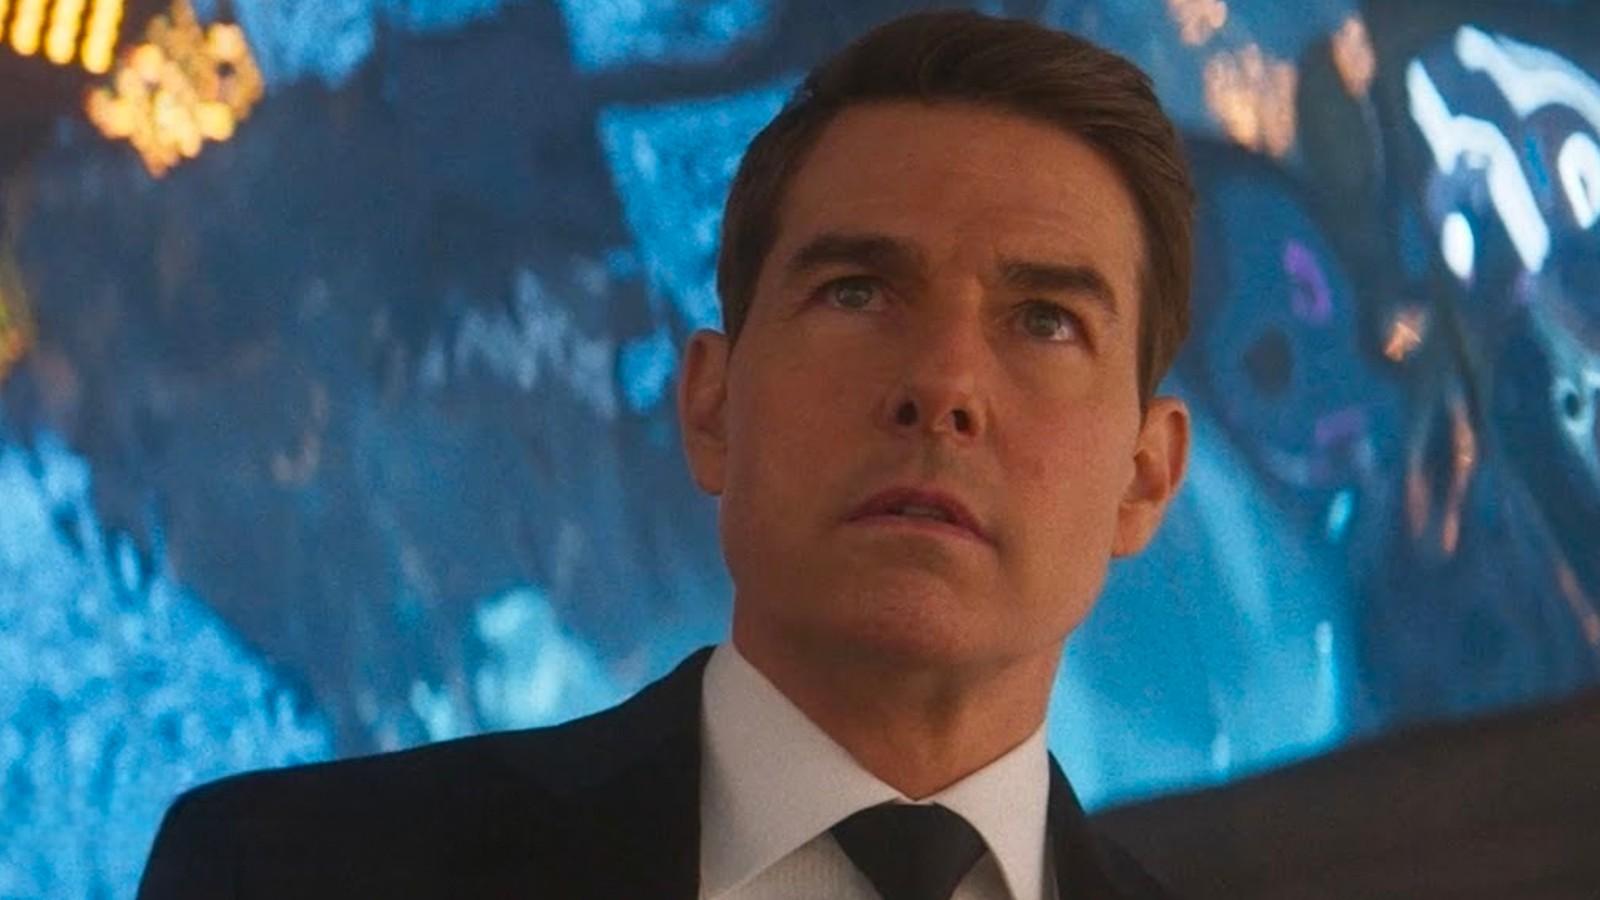 Tom Cruise in Mission: Impossible - Dead Reckoning Part 1